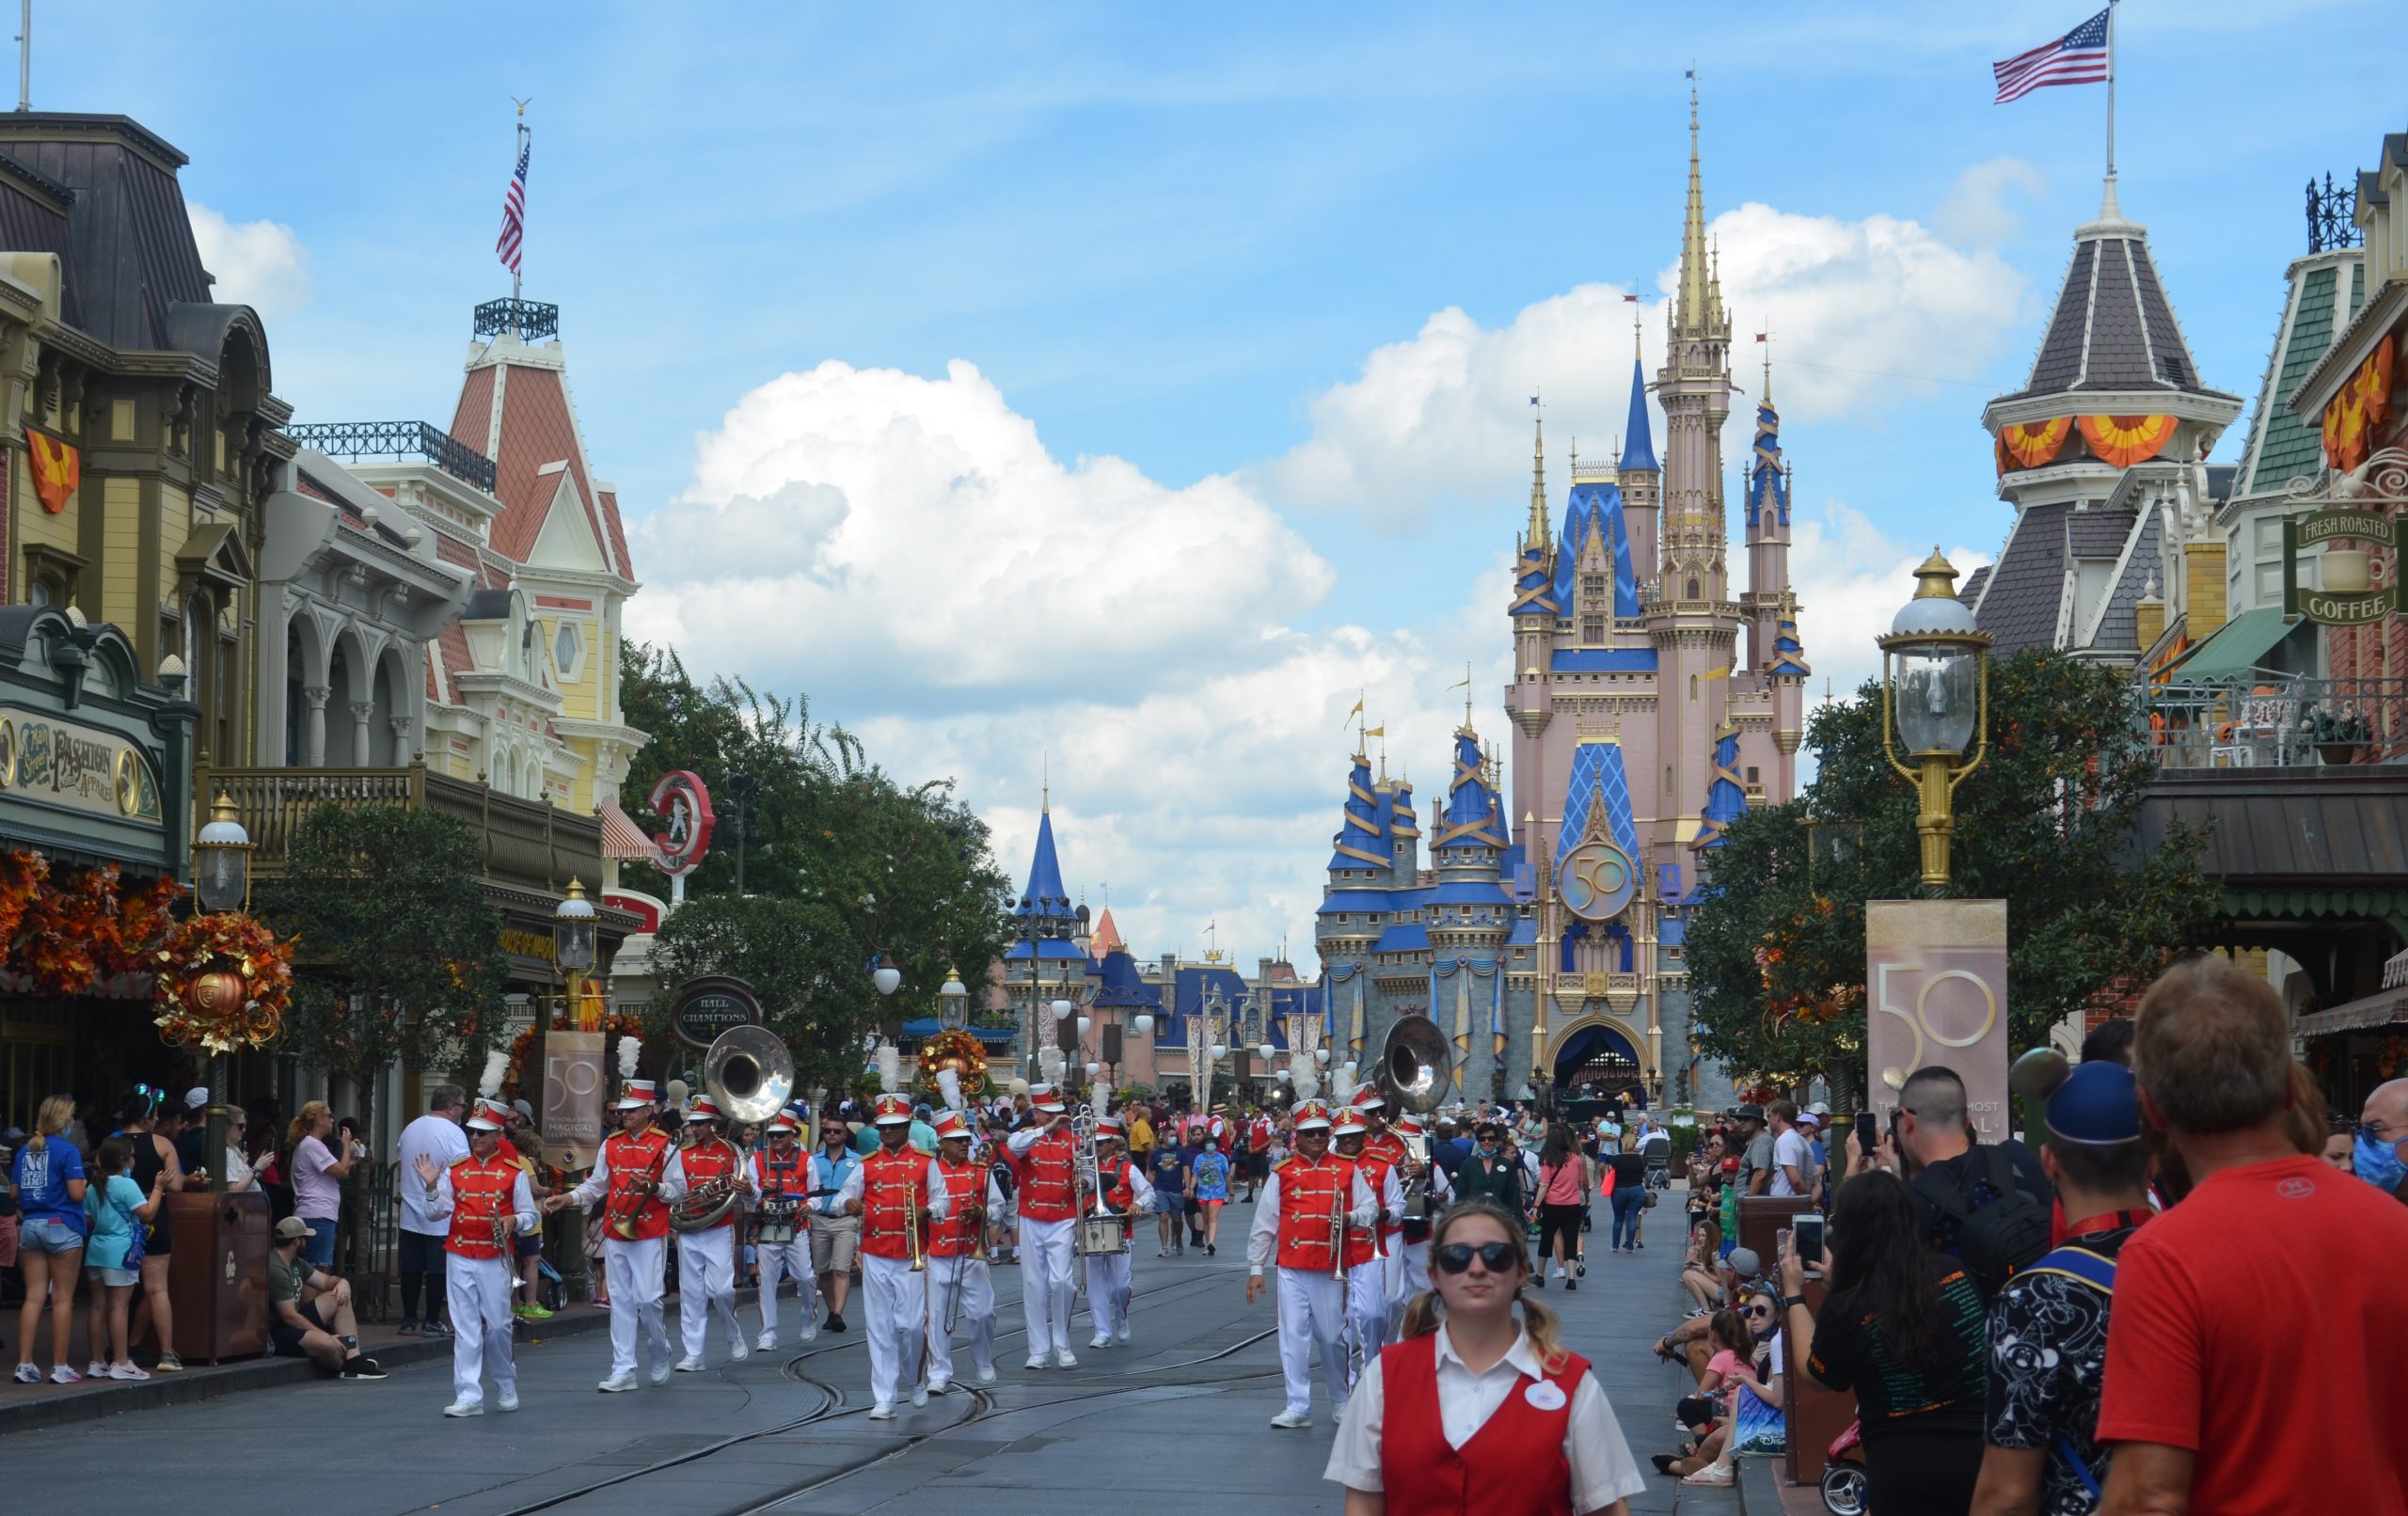 Florida residents to end Walt Disney World’s self-government